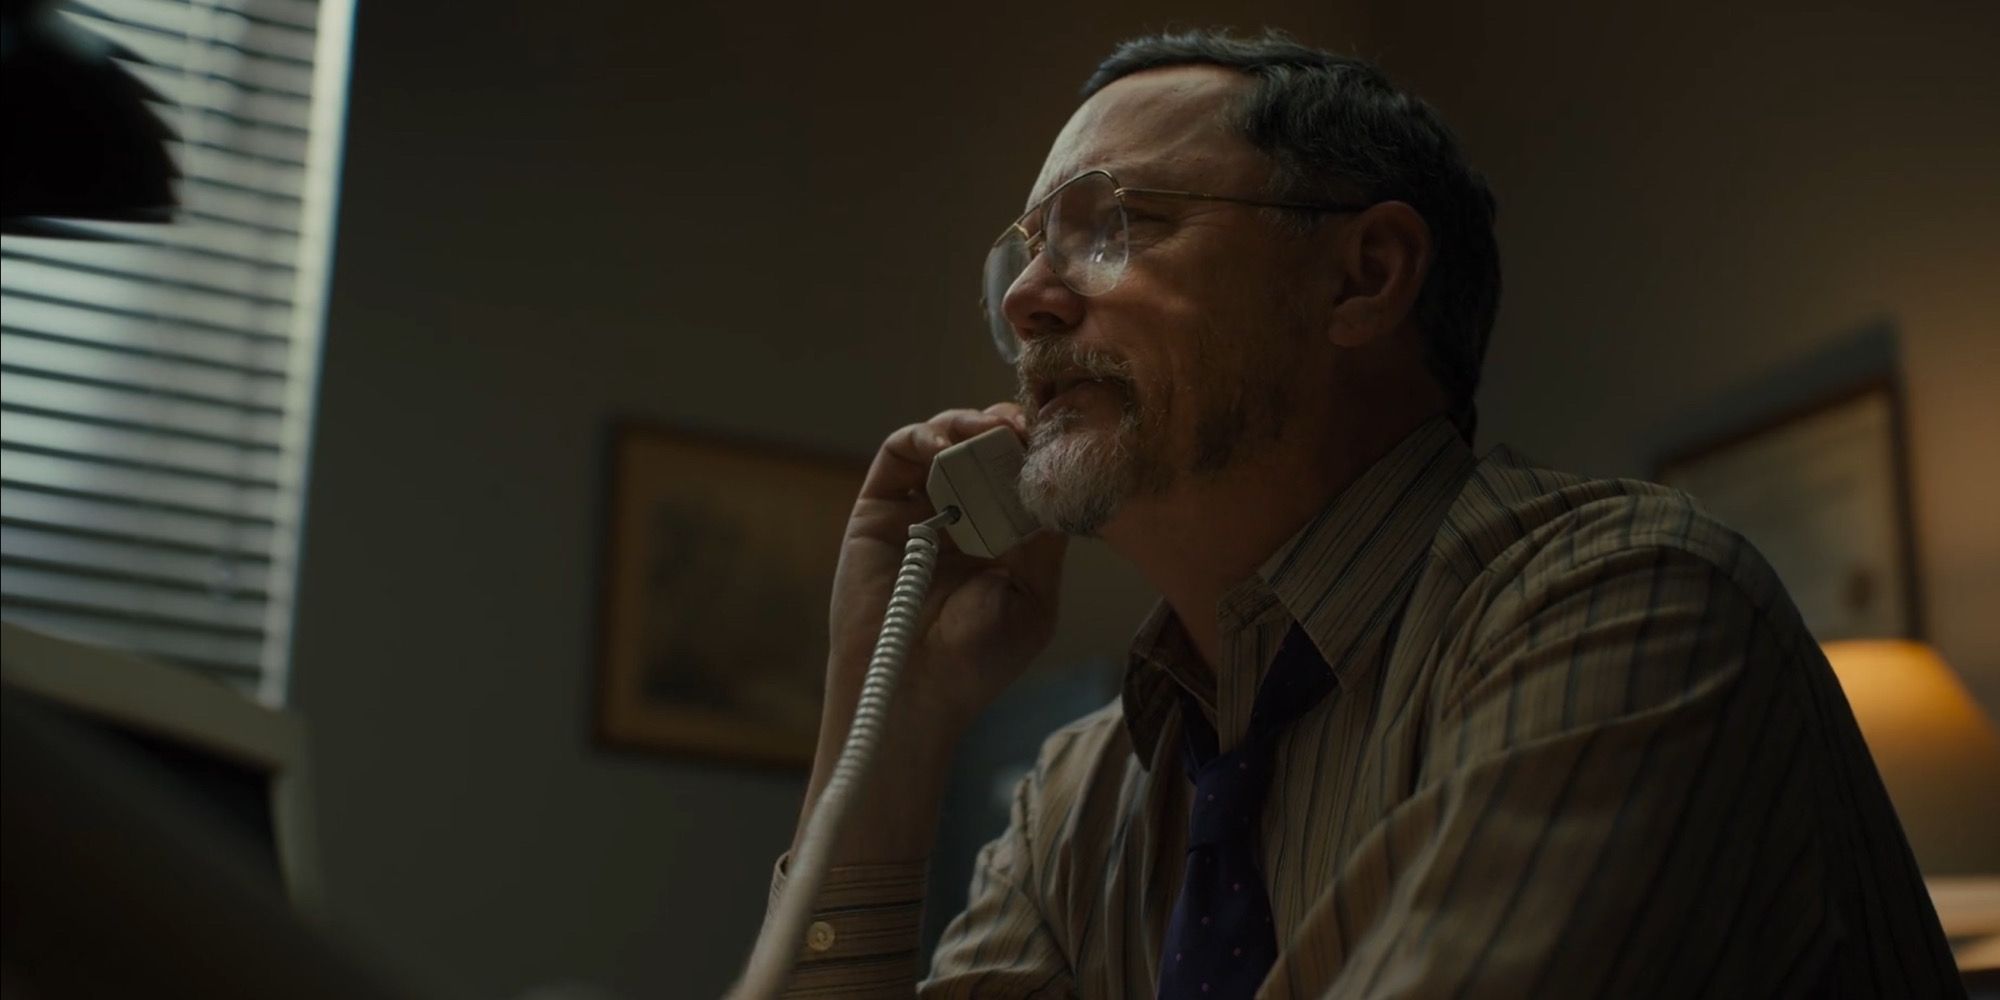 Steve Raglan / William Afton on the phone in the Five Nights at Freddy’s movie